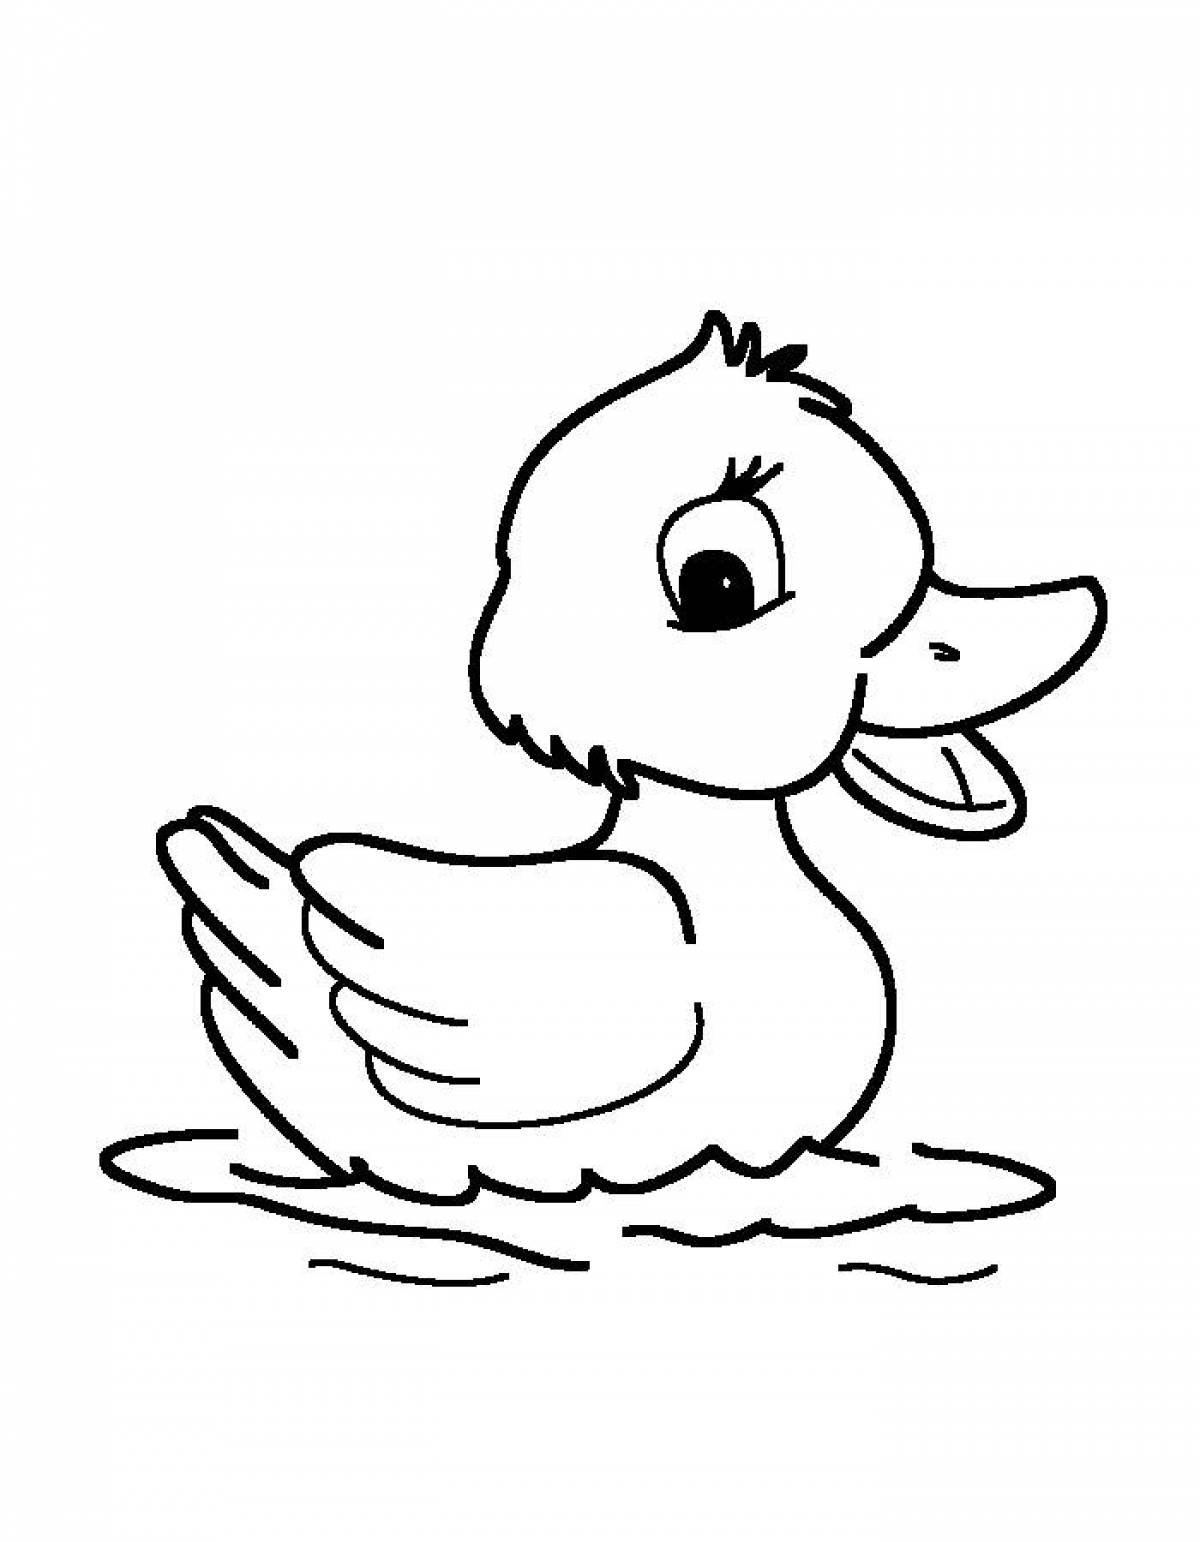 Coloring book magic duck for kids